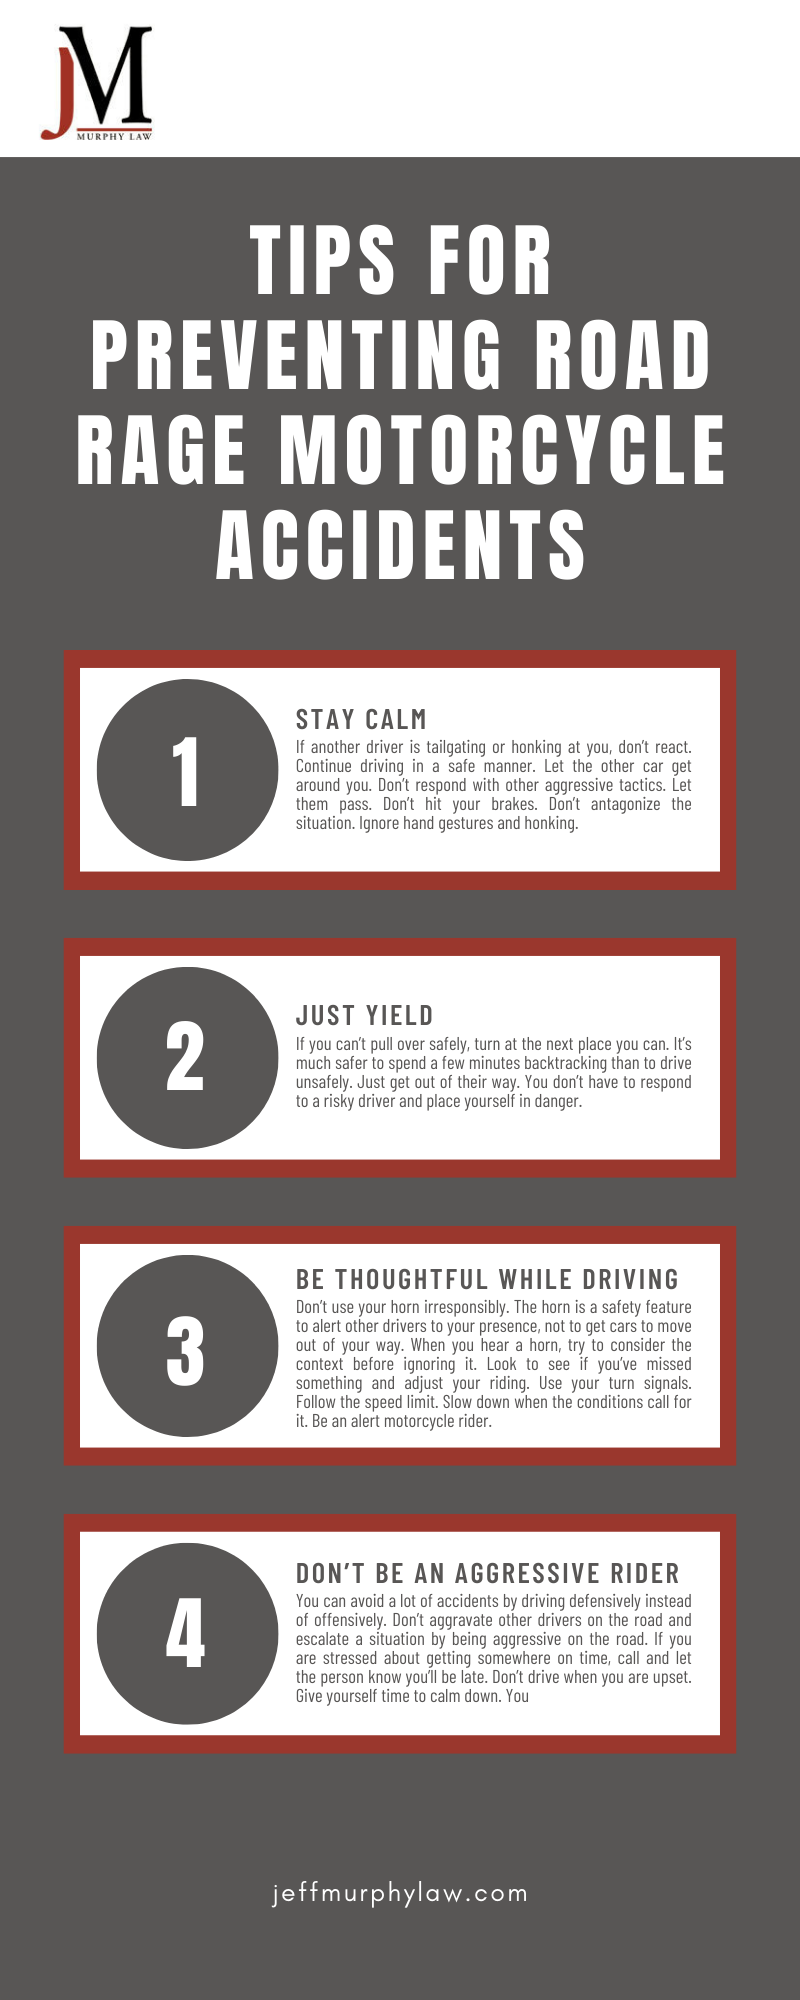 TIPS FOR PREVENTING ROAD RAGE MOTORCYCLE ACCIDENTS INFOGRAPHIC